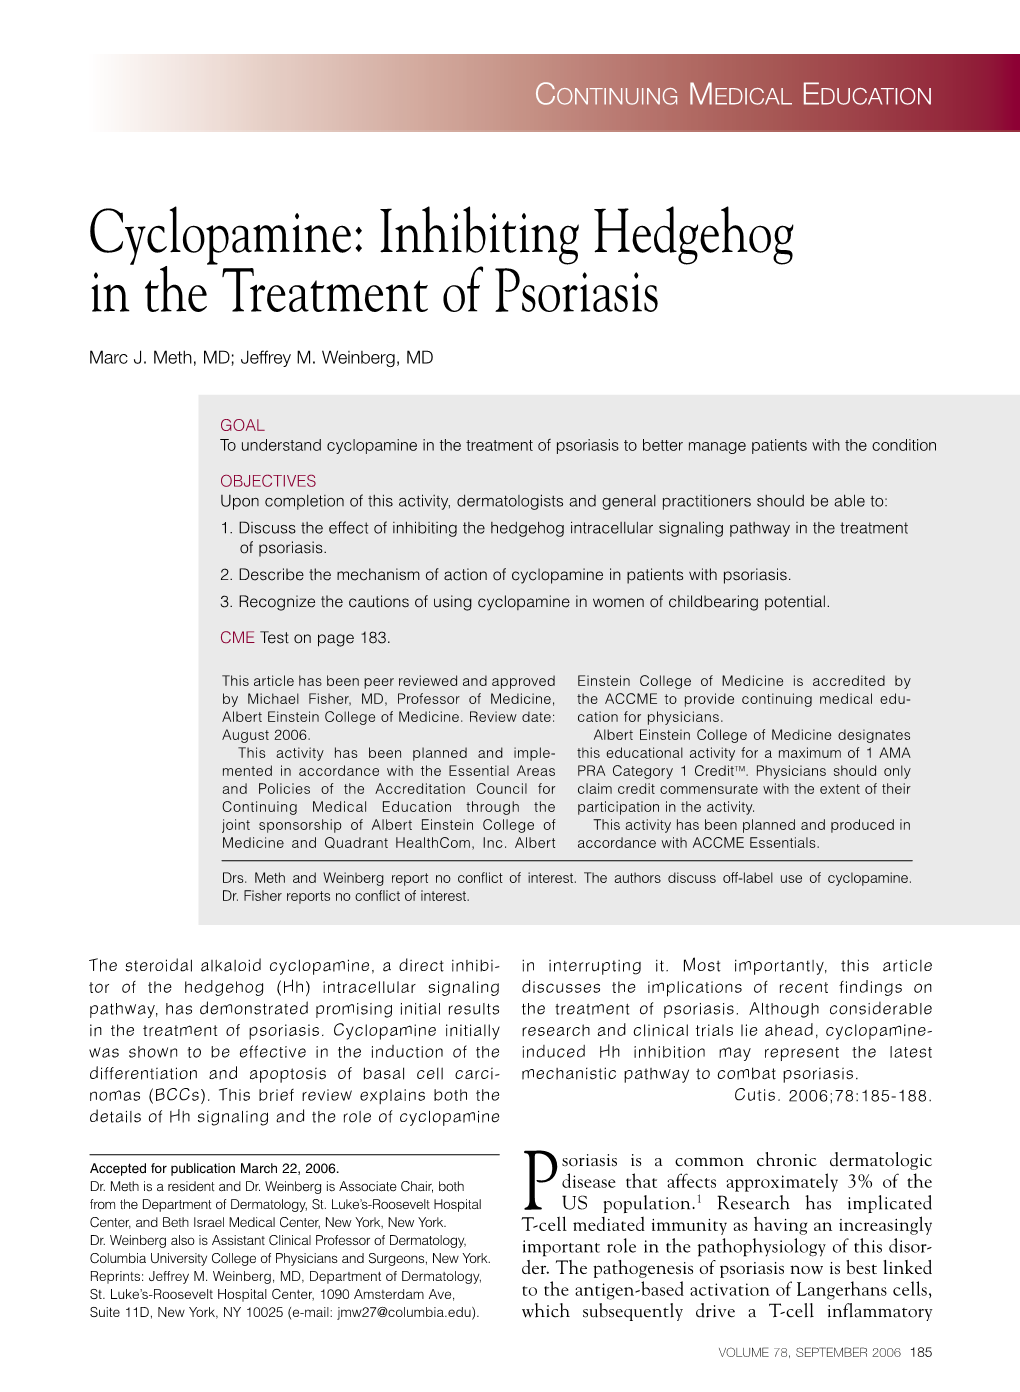 Cyclopamine: Inhibiting Hedgehog in the Treatment of Psoriasis